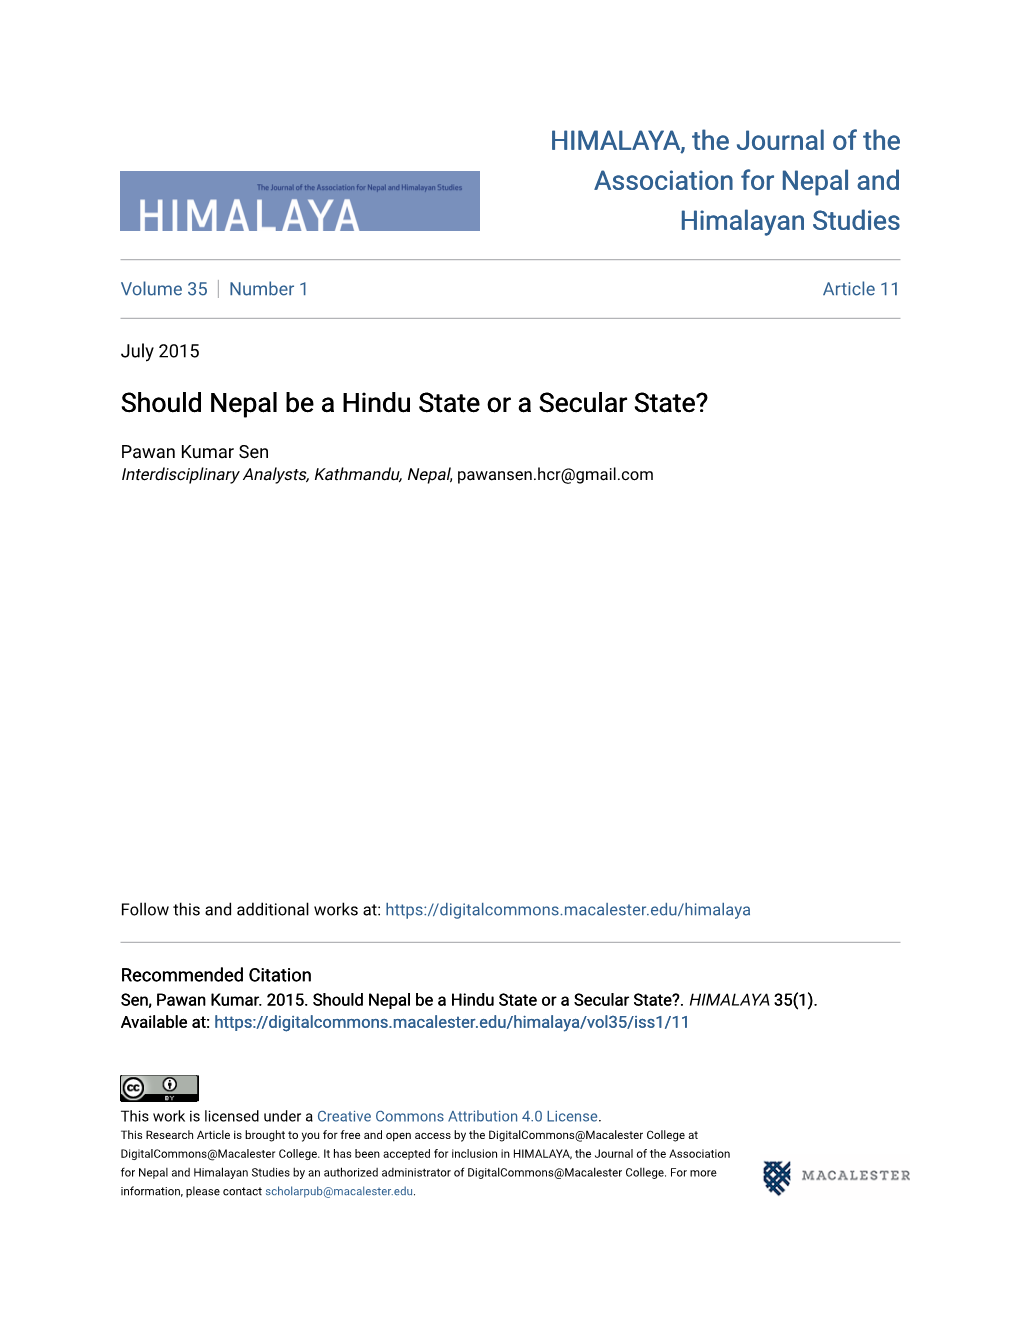 Should Nepal Be a Hindu State Or a Secular State?